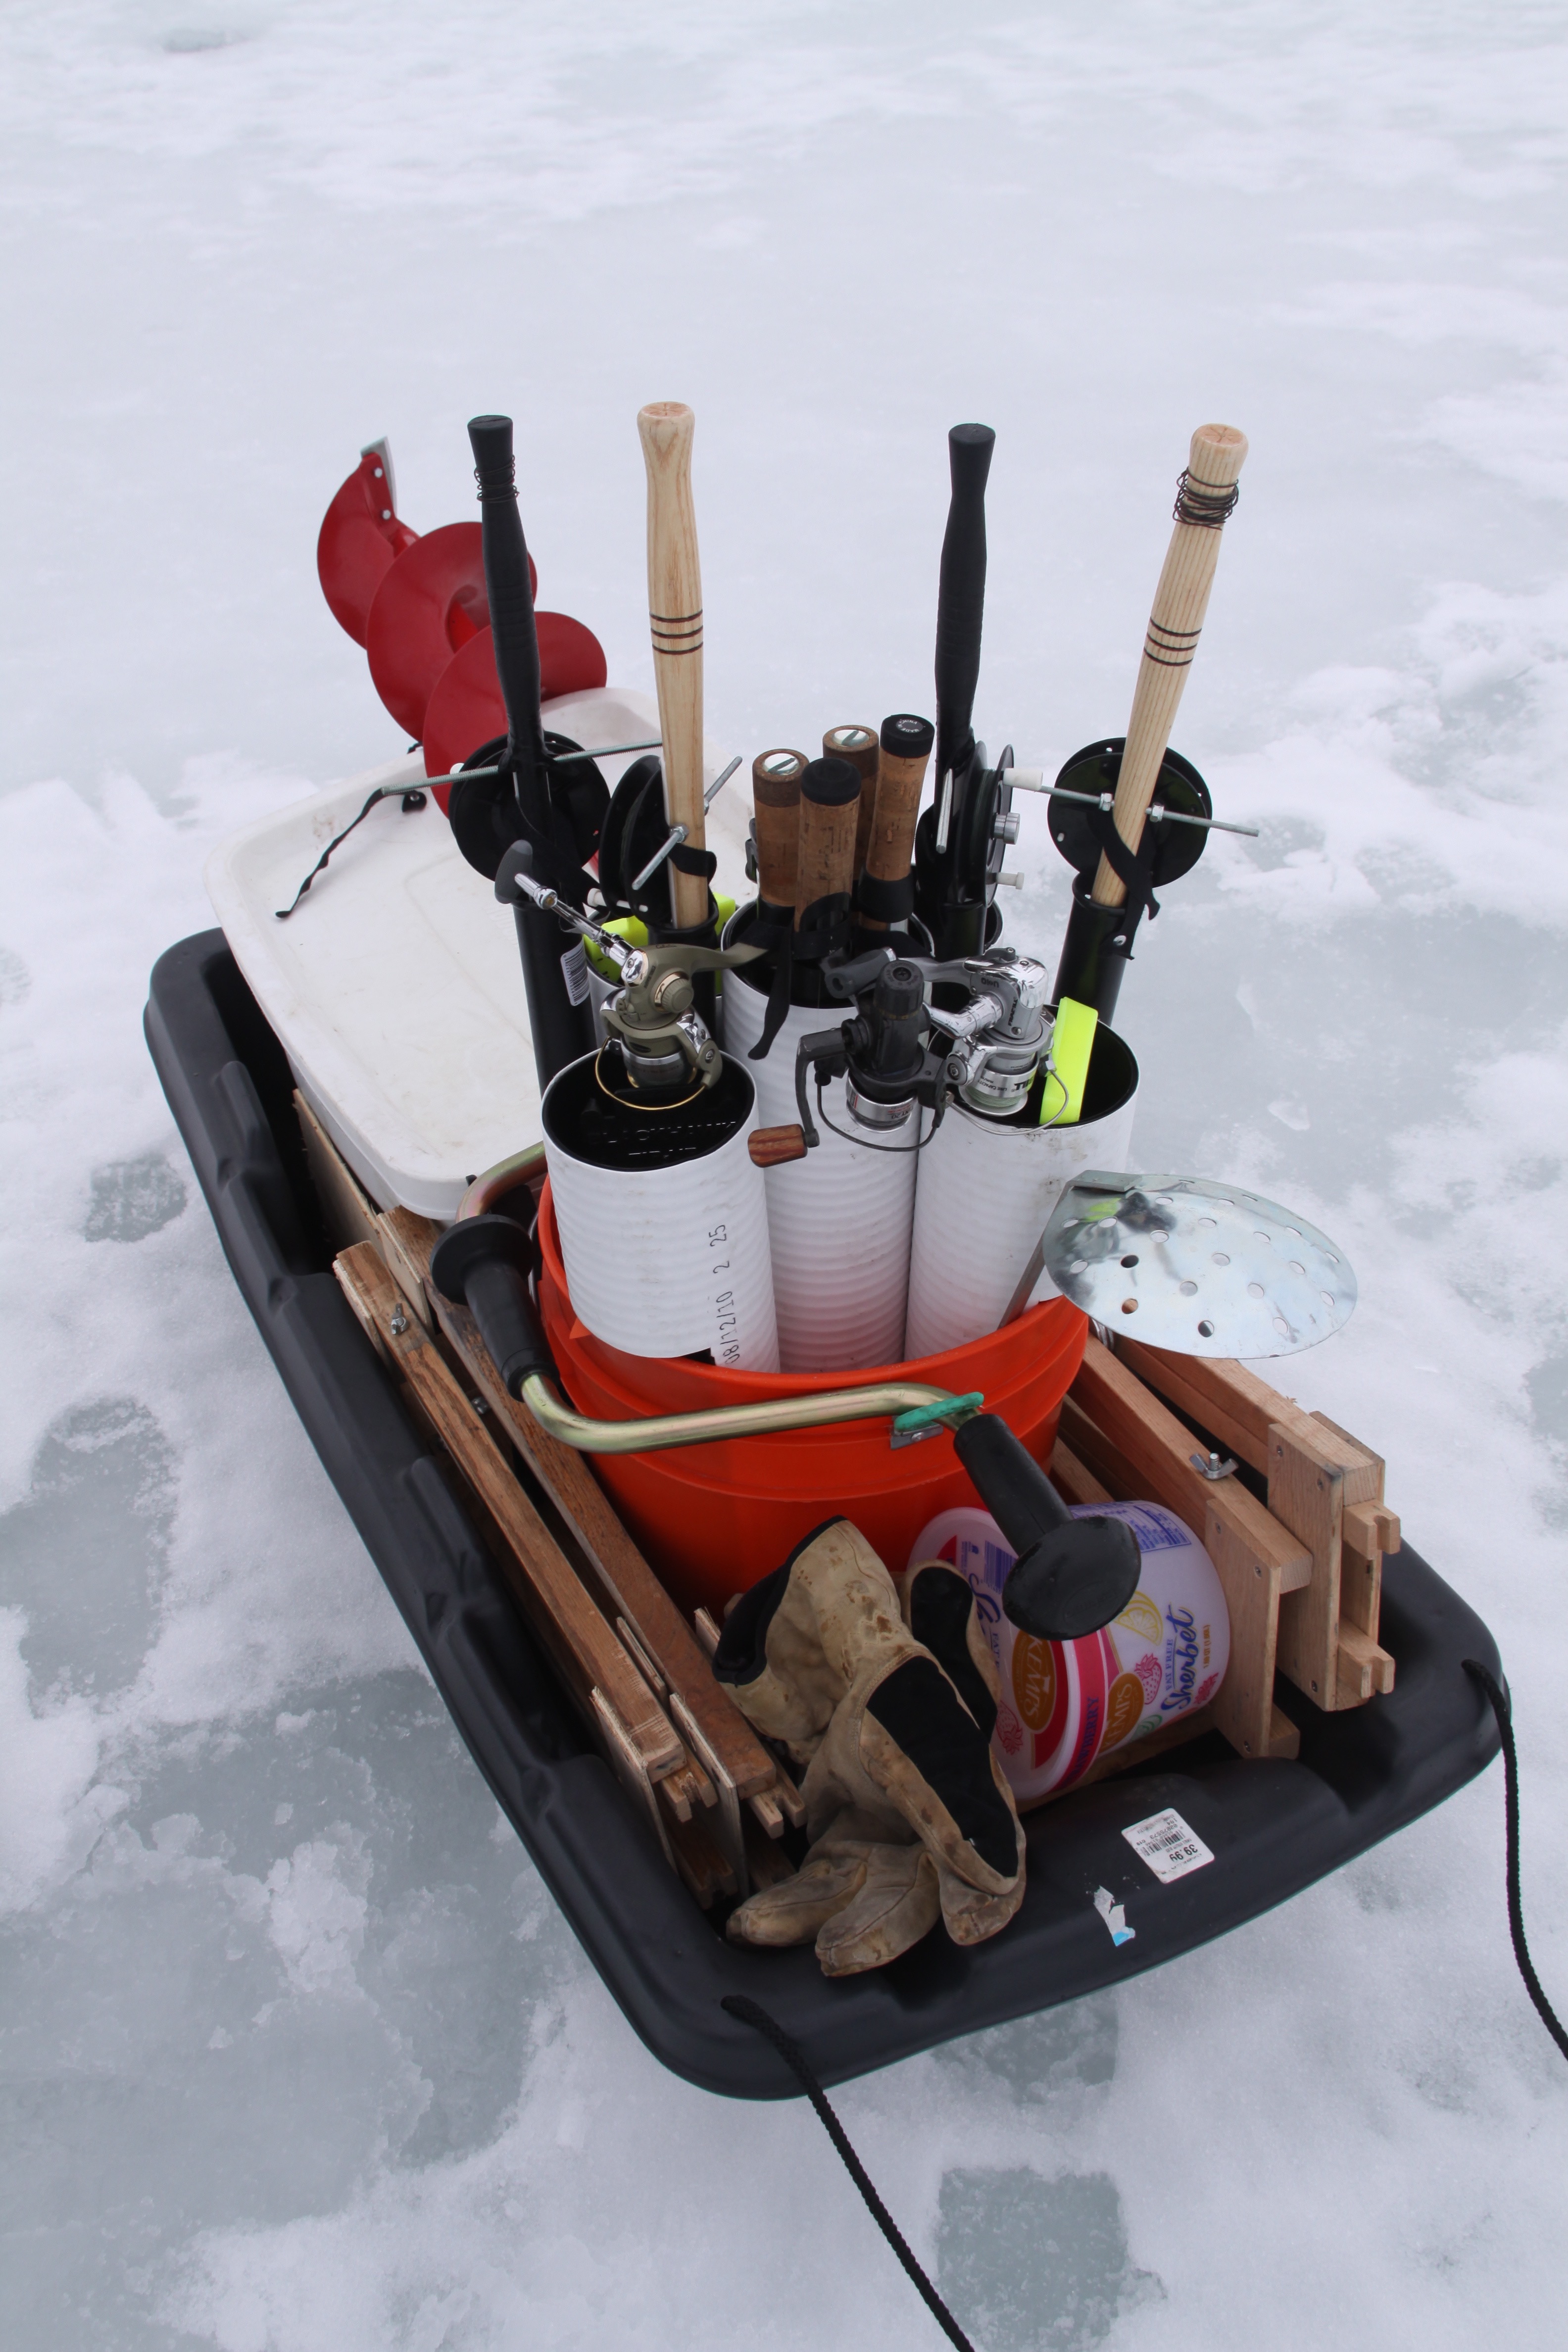 Ice fishing: Idaho's coolest angling opportunity